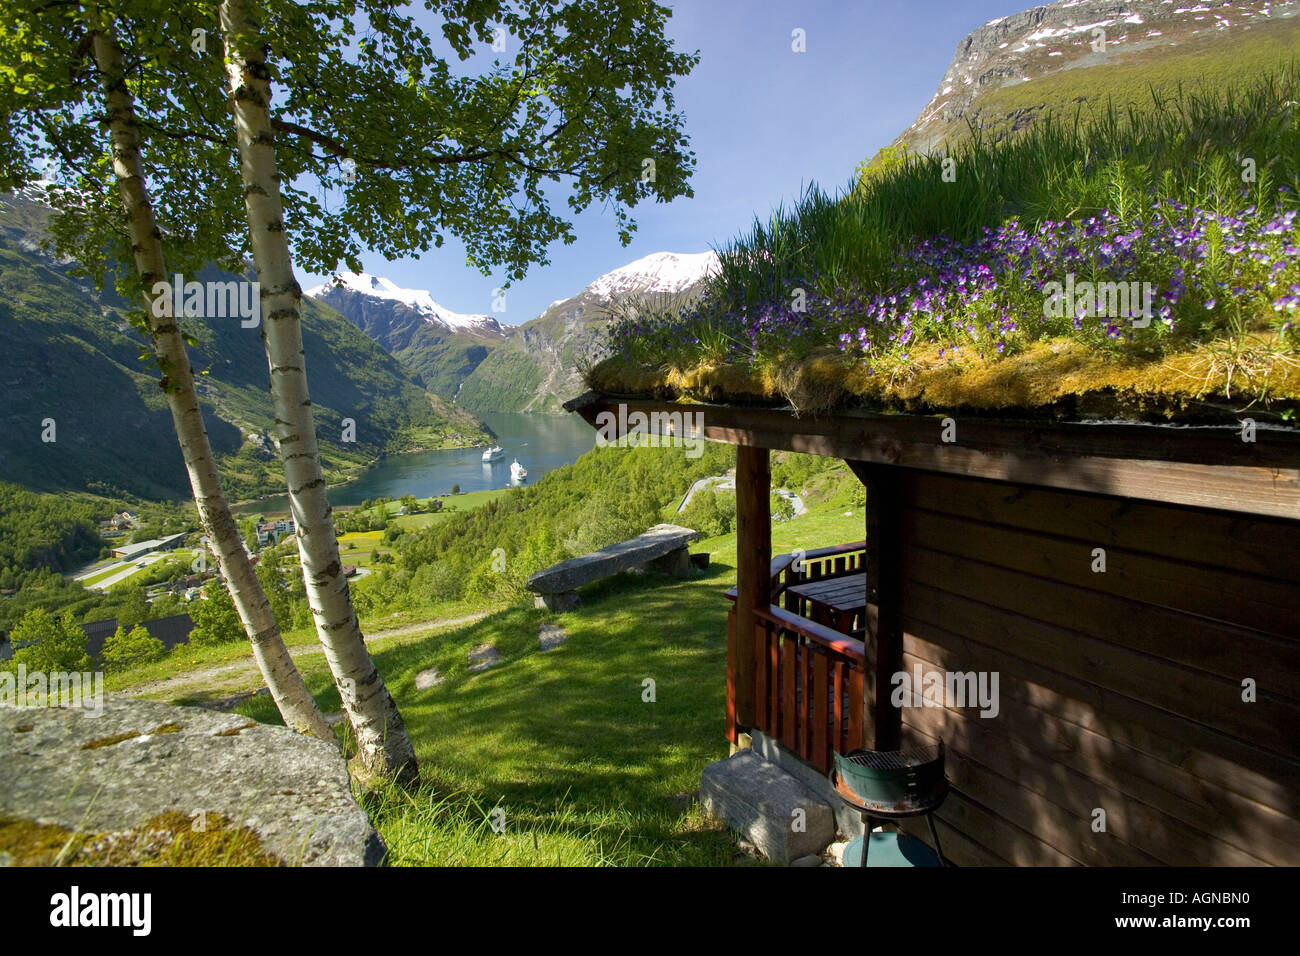 View of the Geirangerfjord from a vacation cabin with grass roof Geiranger Norway Stock Photo